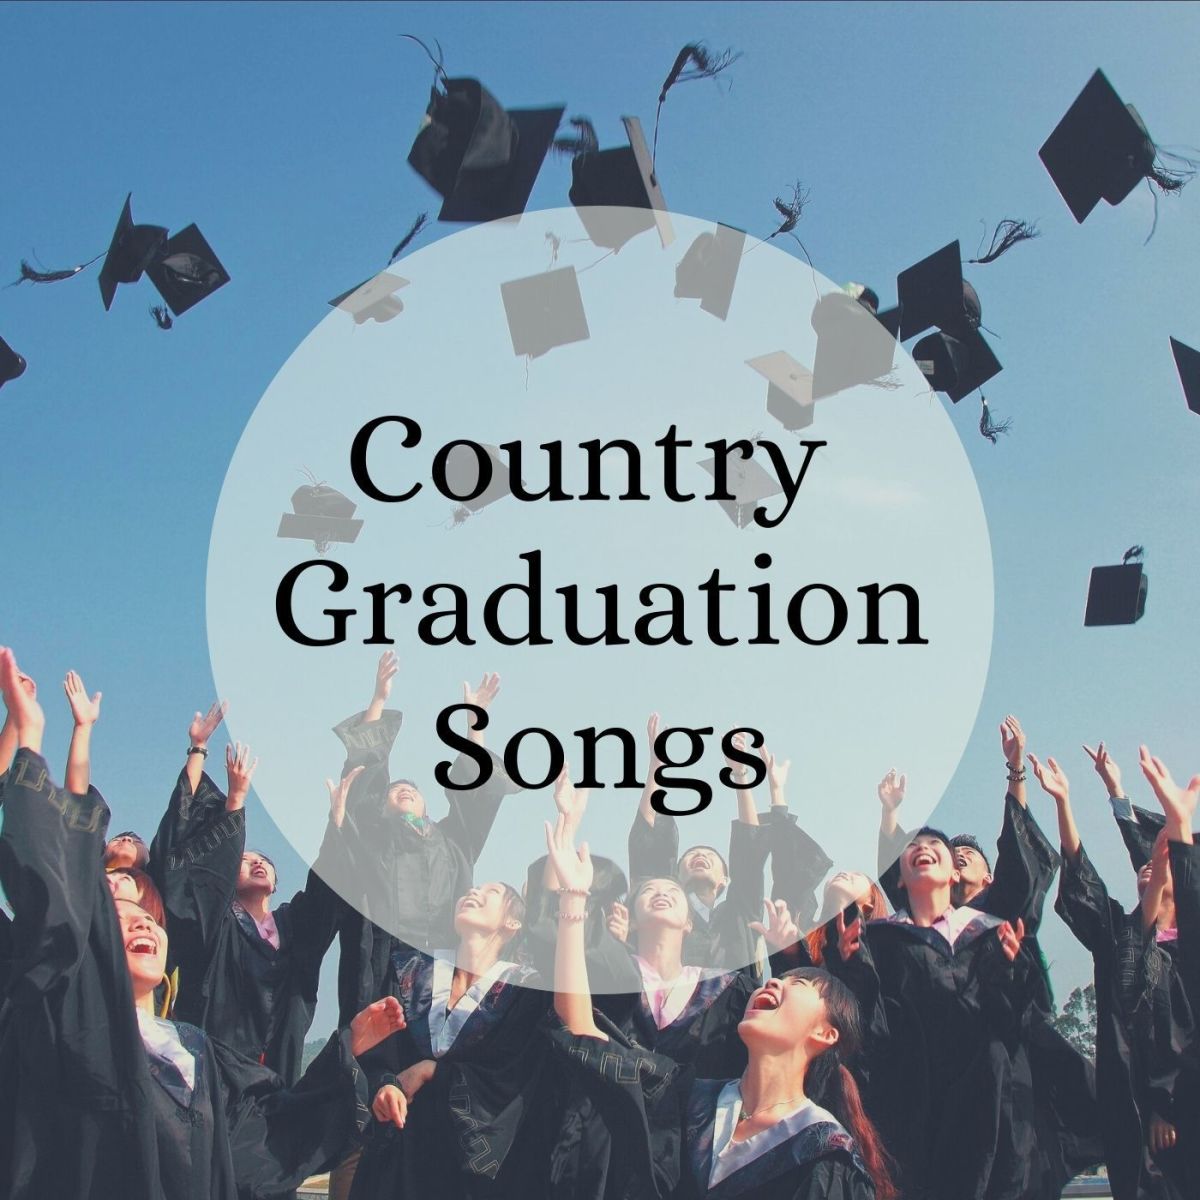 Need some country send-off songs? Look no further!